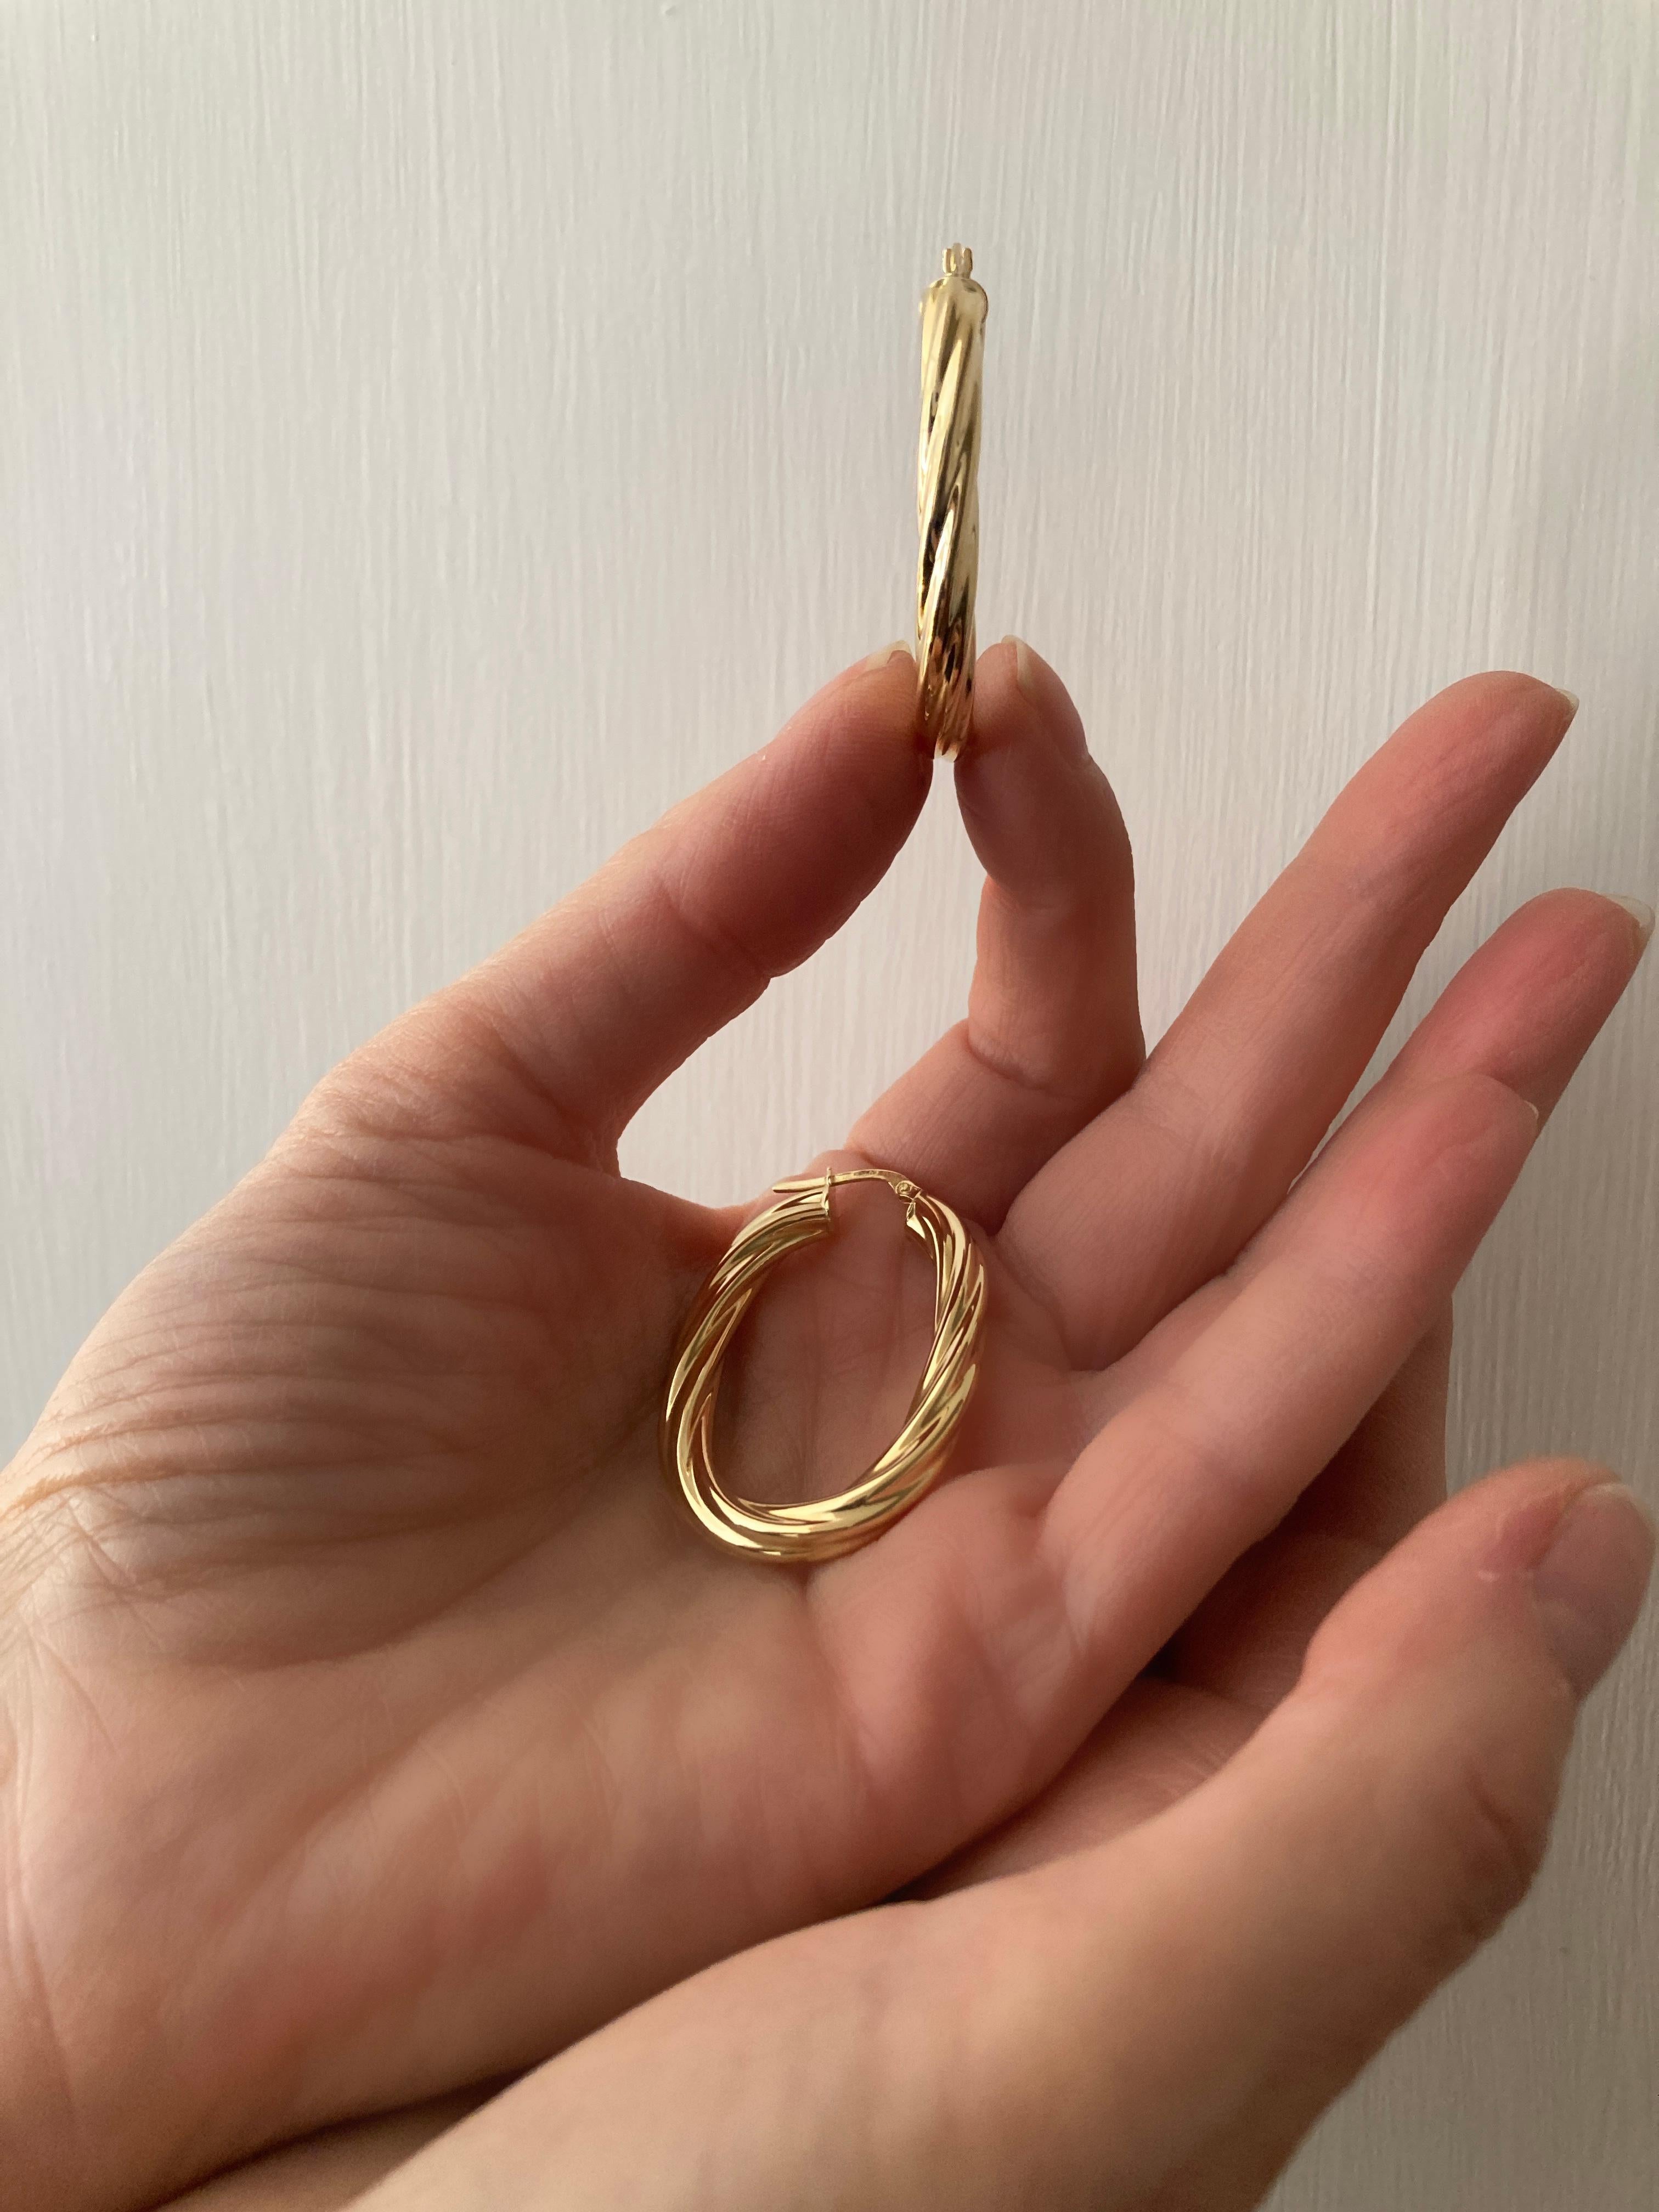 Revival 18K Yellow Gold Hoops Earrings circa 1980 For Sale 5